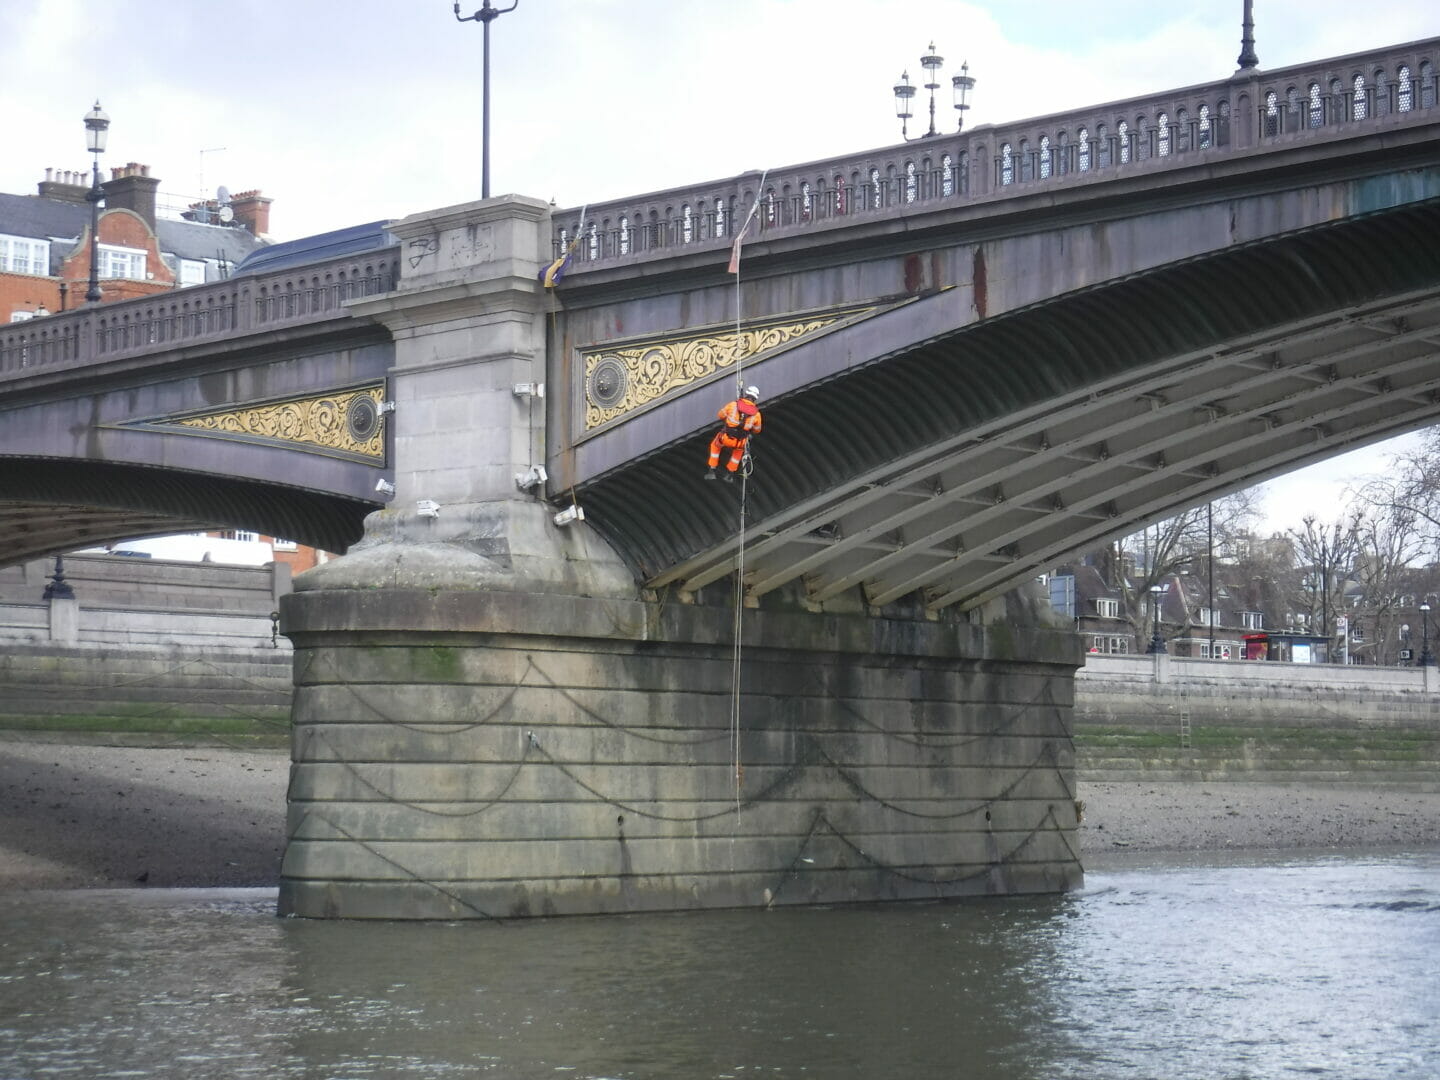 Up close and personal – a return to inspect Battersea Bridge after 31 years